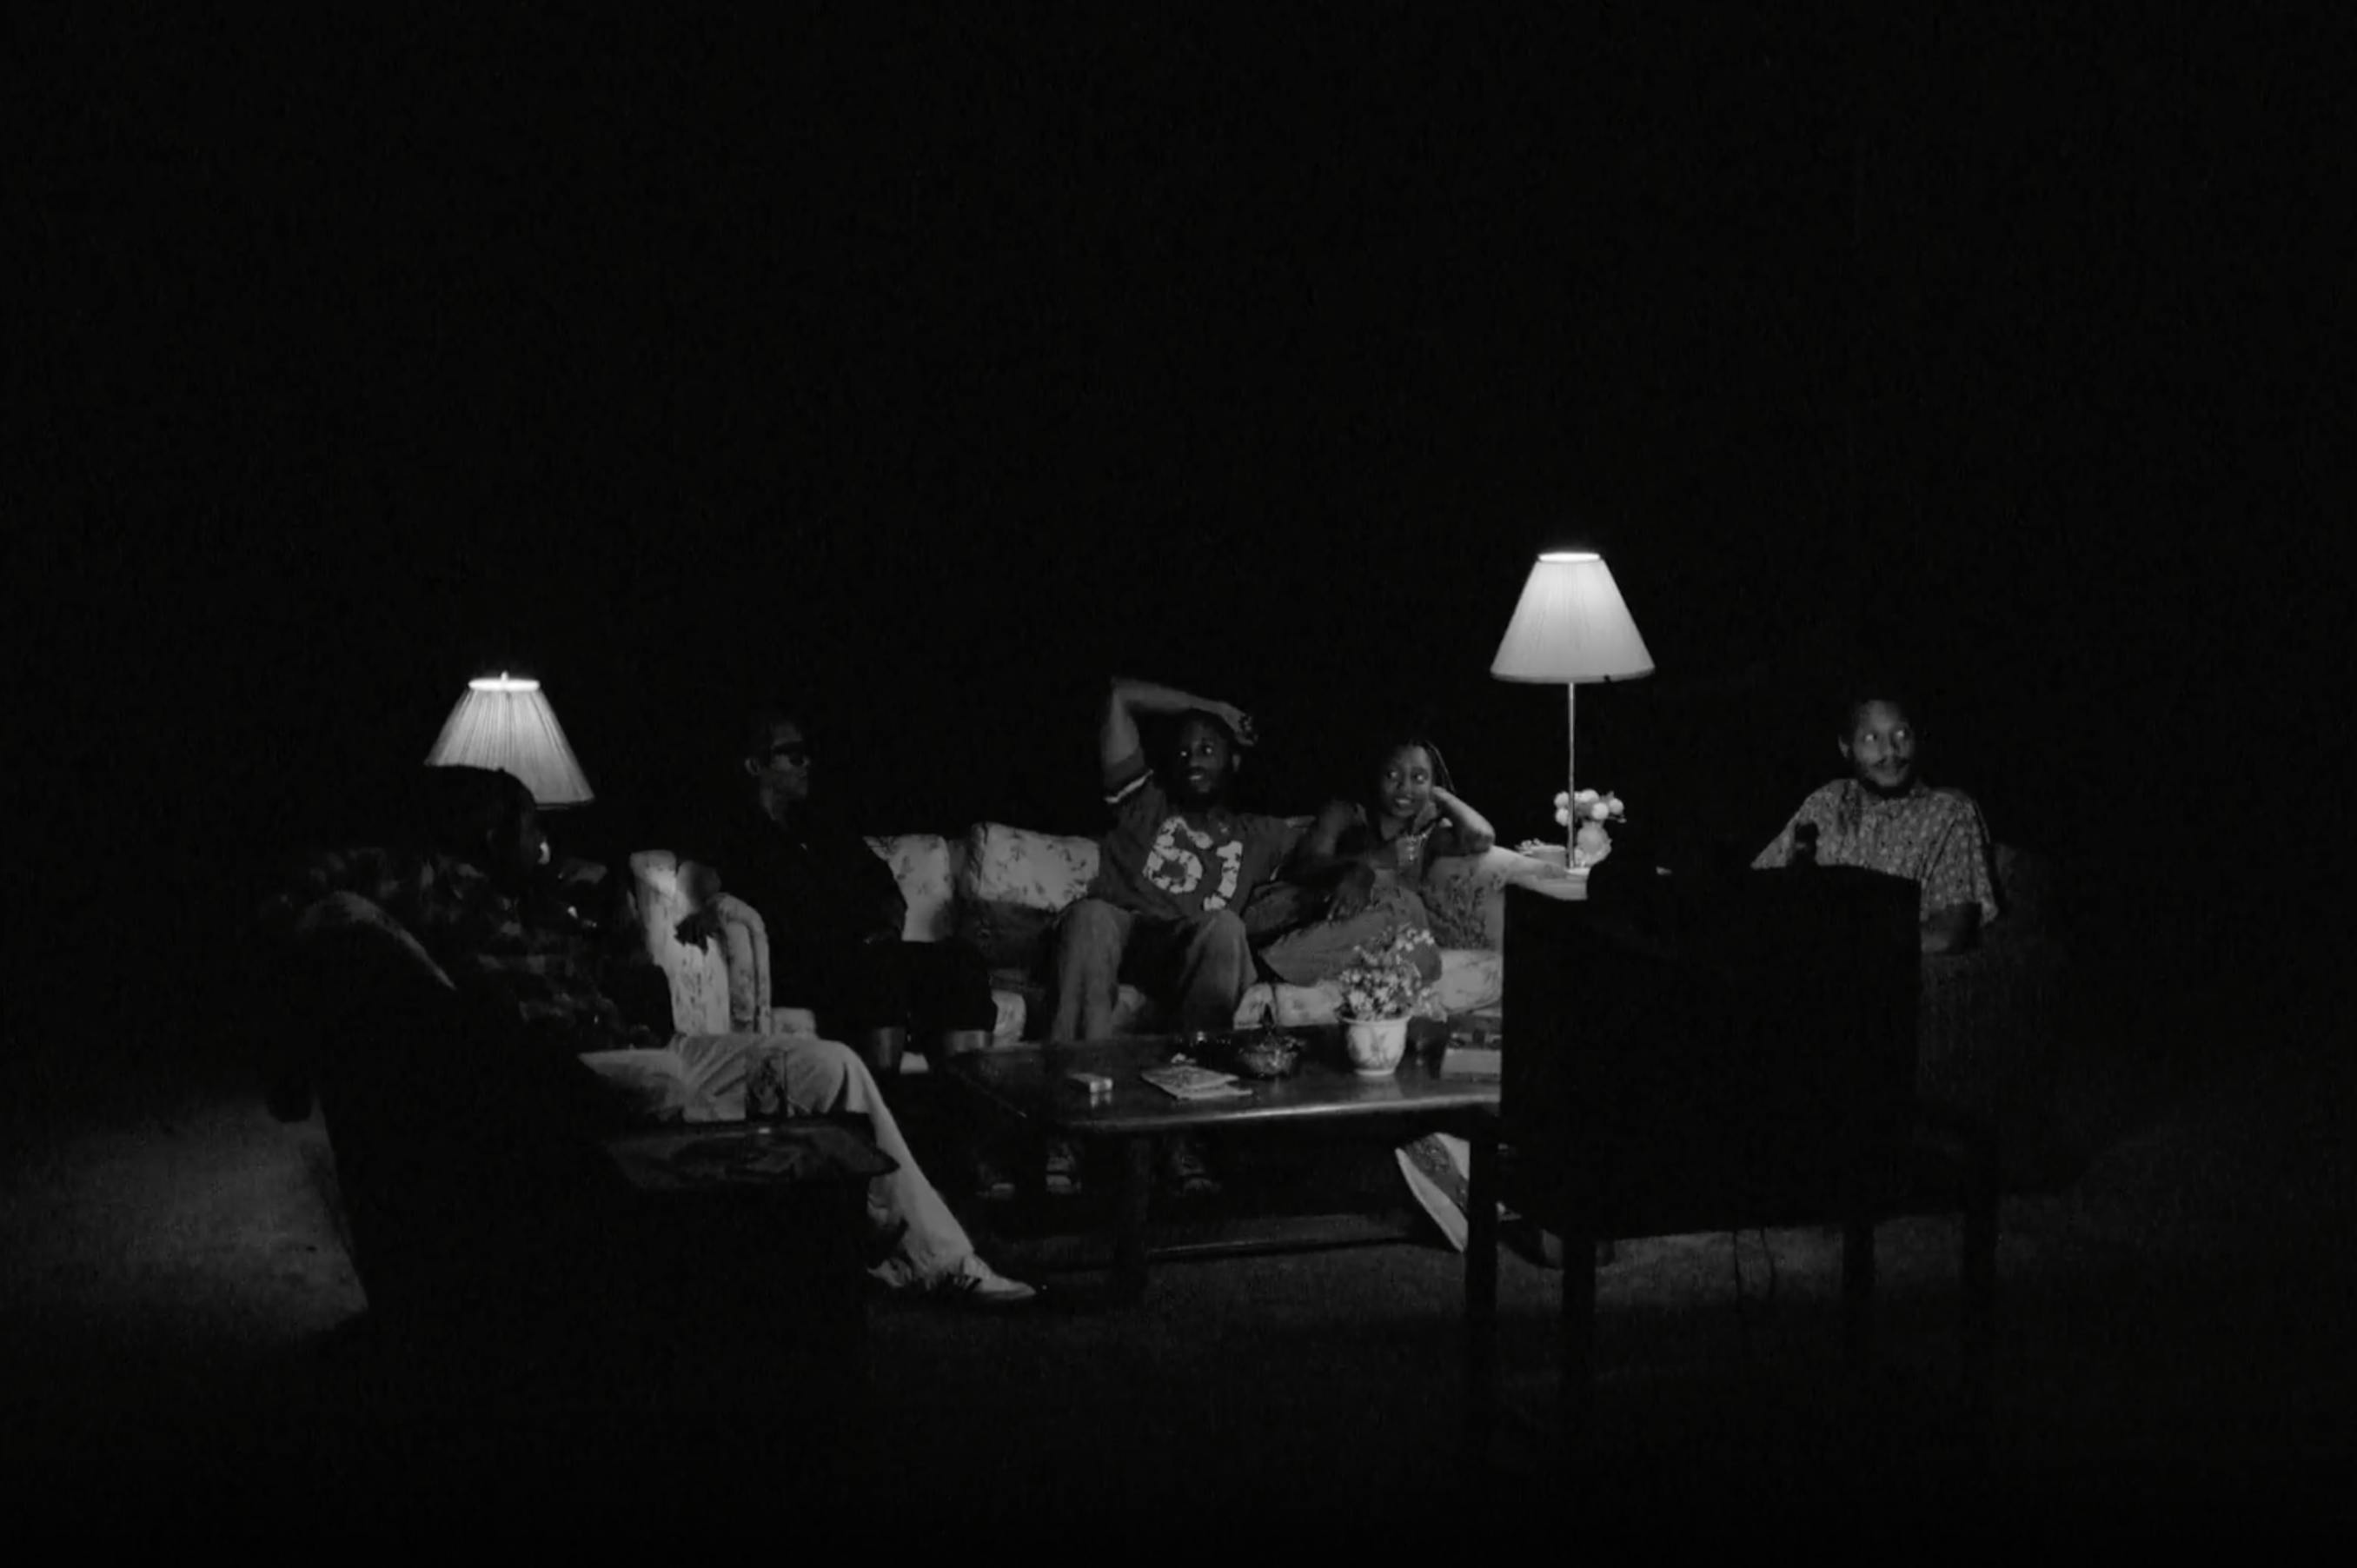 A black and white image of a group of people sitting in a dark room with two lamps glowing